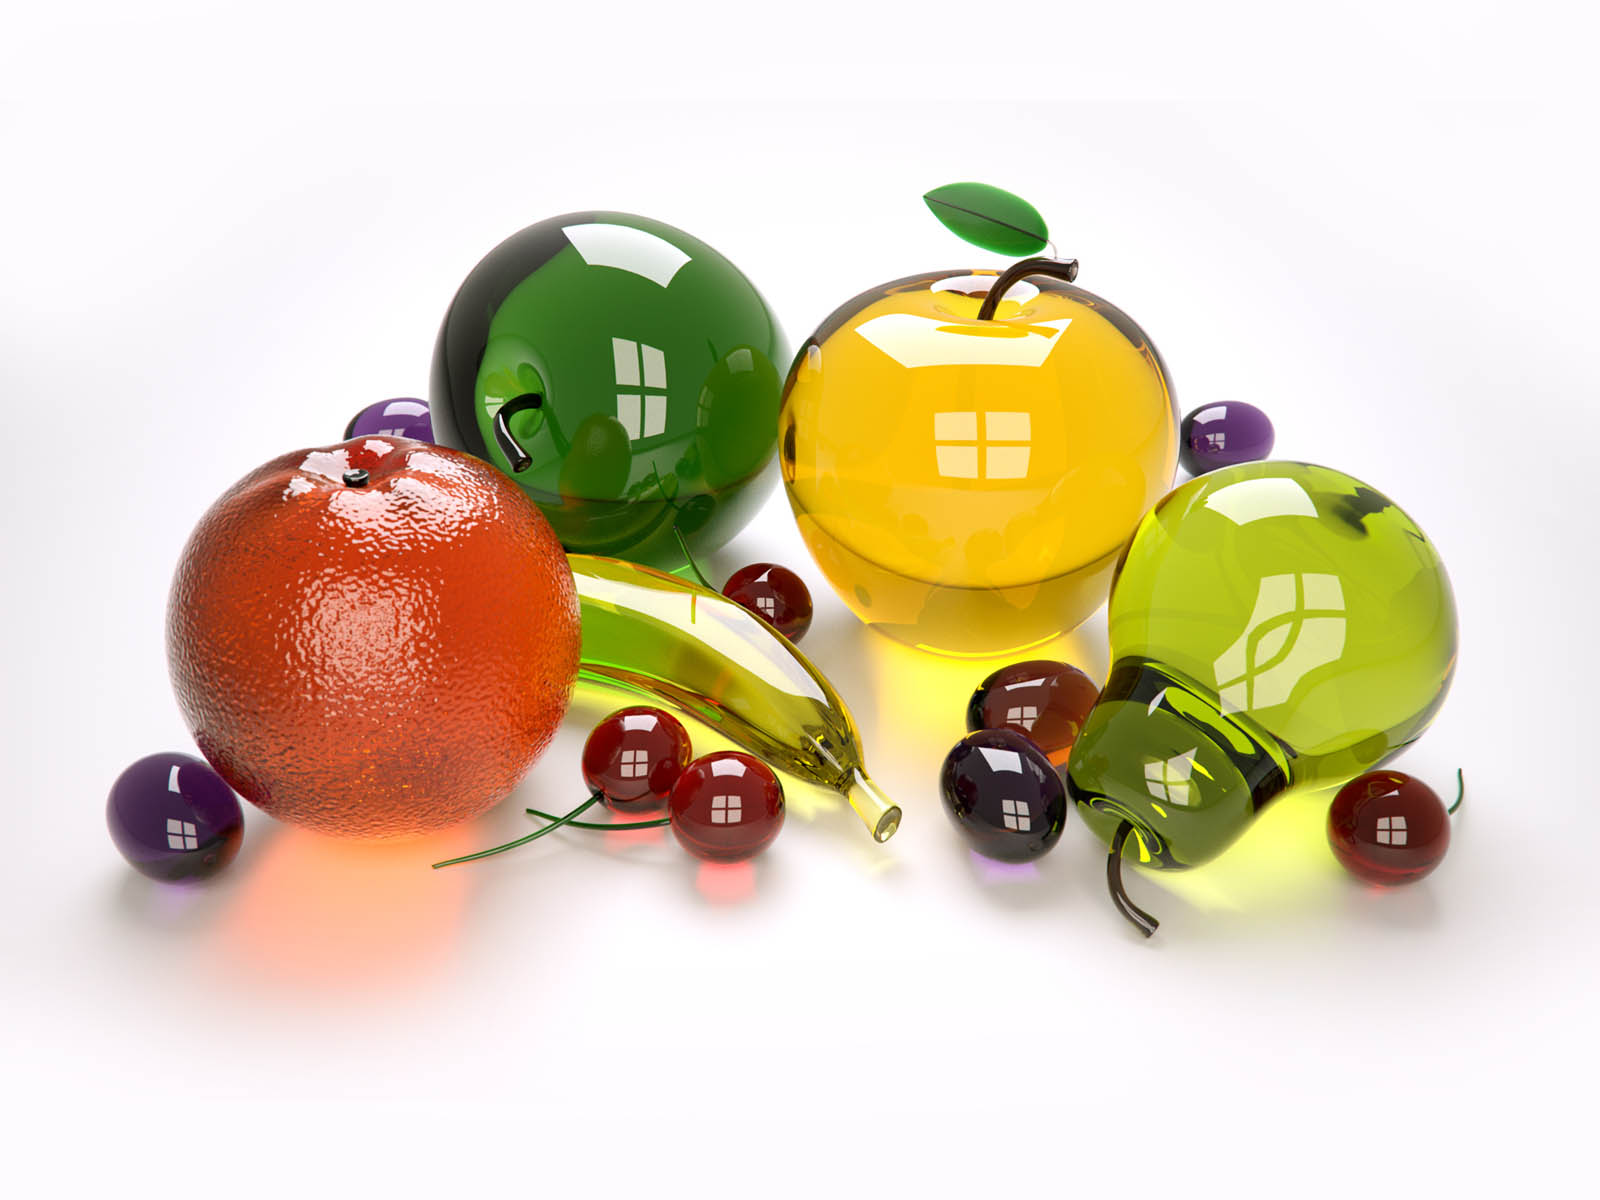 Tag Glass Fruits Wallpapers Images Photos Pictures and Backgrounds